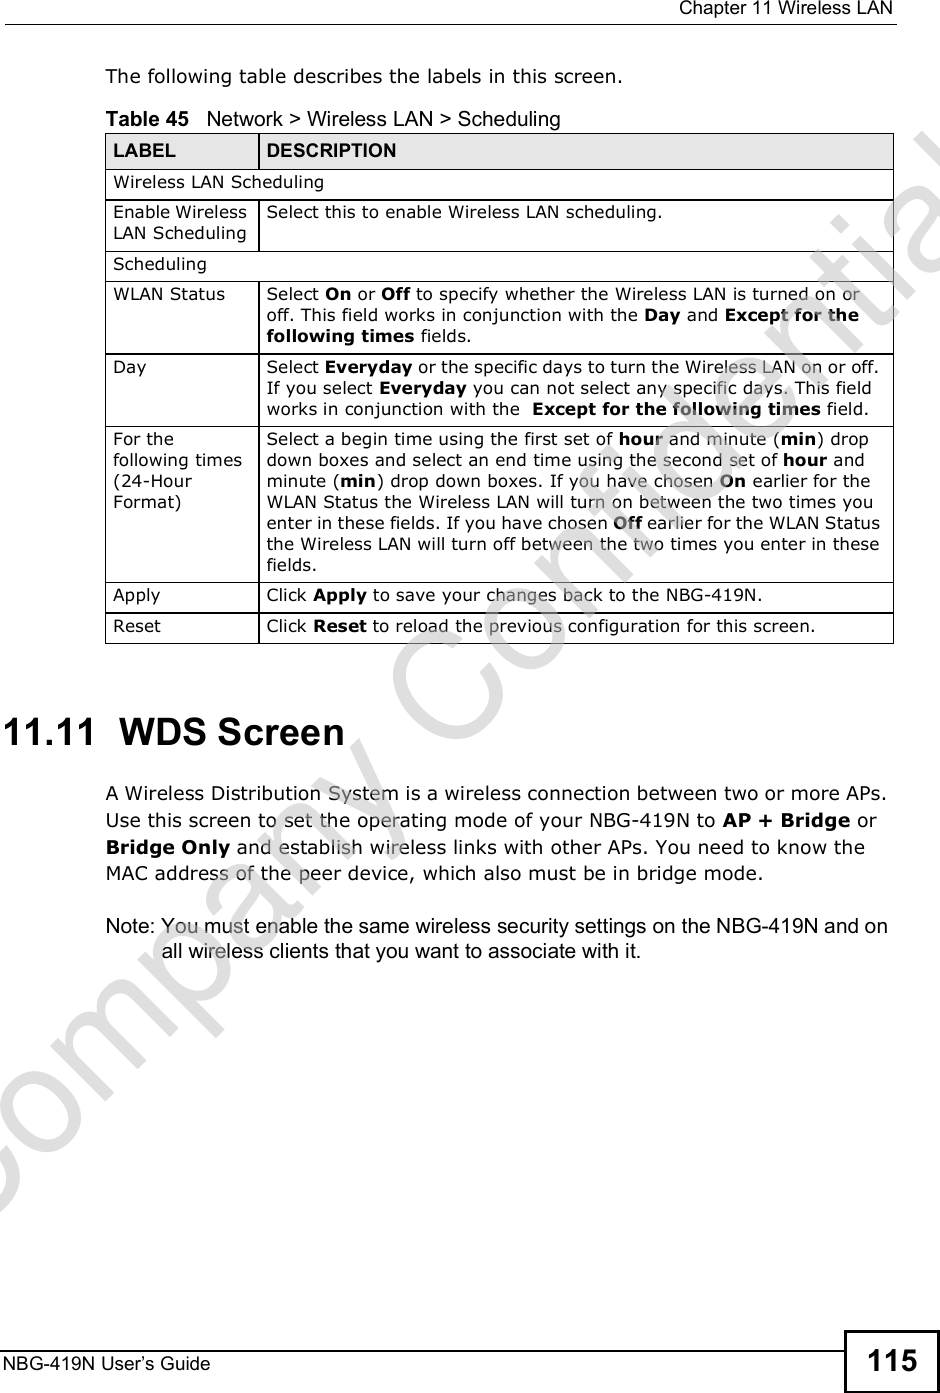  Chapter 11Wireless LANNBG-419N User s Guide 115The following table describes the labels in this screen.11.11  WDS ScreenA Wireless Distribution System is a wireless connection between two or more APs. Use this screen to set the operating mode of your NBG-419N to AP + Bridge or Bridge Only and establish wireless links with other APs. You need to know the MAC address of the peer device, which also must be in bridge mode. Note: You must enable the same wireless security settings on the NBG-419N and on all wireless clients that you want to associate with it. Table 45   Network &gt; Wireless LAN &gt; SchedulingLABEL DESCRIPTIONWireless LAN SchedulingEnable Wireless LAN SchedulingSelect this to enable Wireless LAN scheduling.SchedulingWLAN Status Select On or Off to specify whether the Wireless LAN is turned on or off. This field works in conjunction with the Day and Except for the following times fields.Day Select Everyday or the specific days to turn the Wireless LAN on or off. If you select Everyday you can not select any specific days. This field works in conjunction with the  Except for the following times field.For the following times (24-Hour Format)Select a begin time using the first set of hour and minute (min) drop down boxes and select an end time using the second set of hour and minute (min) drop down boxes. If you have chosen On earlier for the WLAN Status the Wireless LAN will turn on between the two times you enter in these fields. If you have chosen Off earlier for the WLAN Status the Wireless LAN will turn off between the two times you enter in these fields. Apply Click Apply to save your changes back to the NBG-419N.Reset Click Reset to reload the previous configuration for this screen.Company Confidential